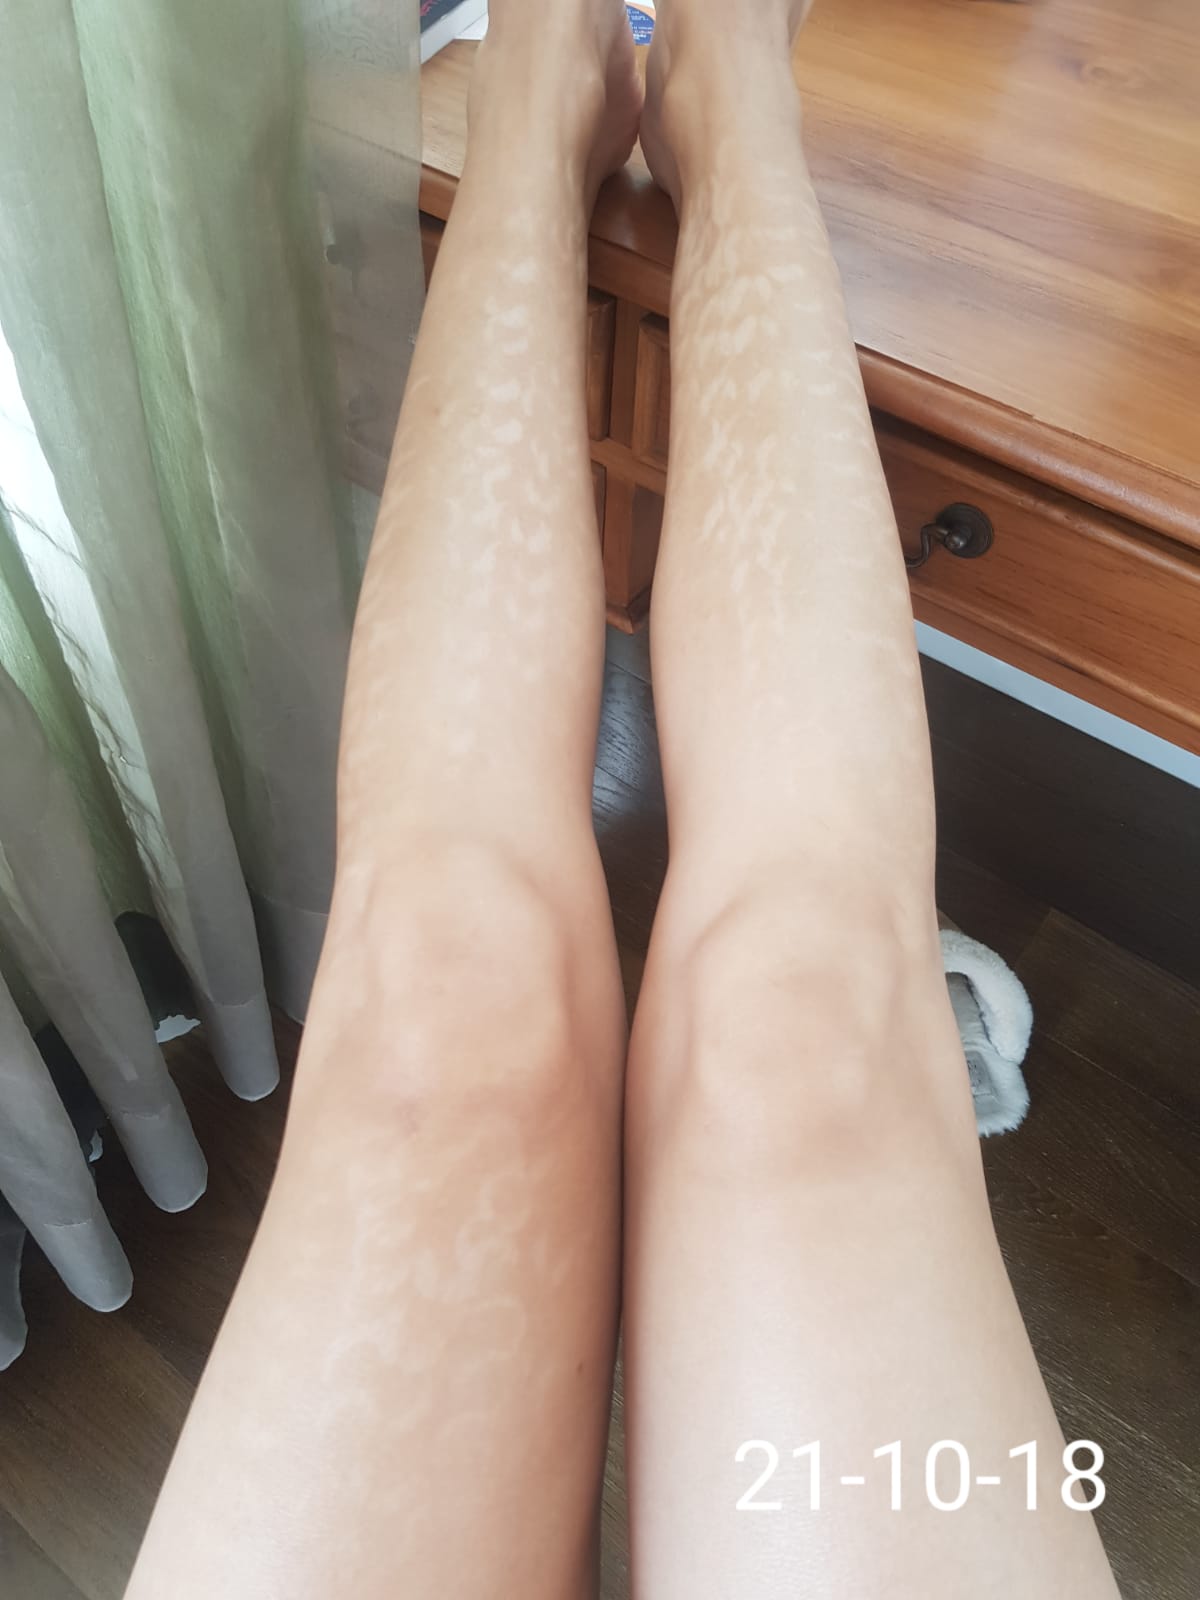 Hypopigmentation after laser treatment burns (photo) - Tips For Skin Care -  Hairtell hair removal forum by Andrea James